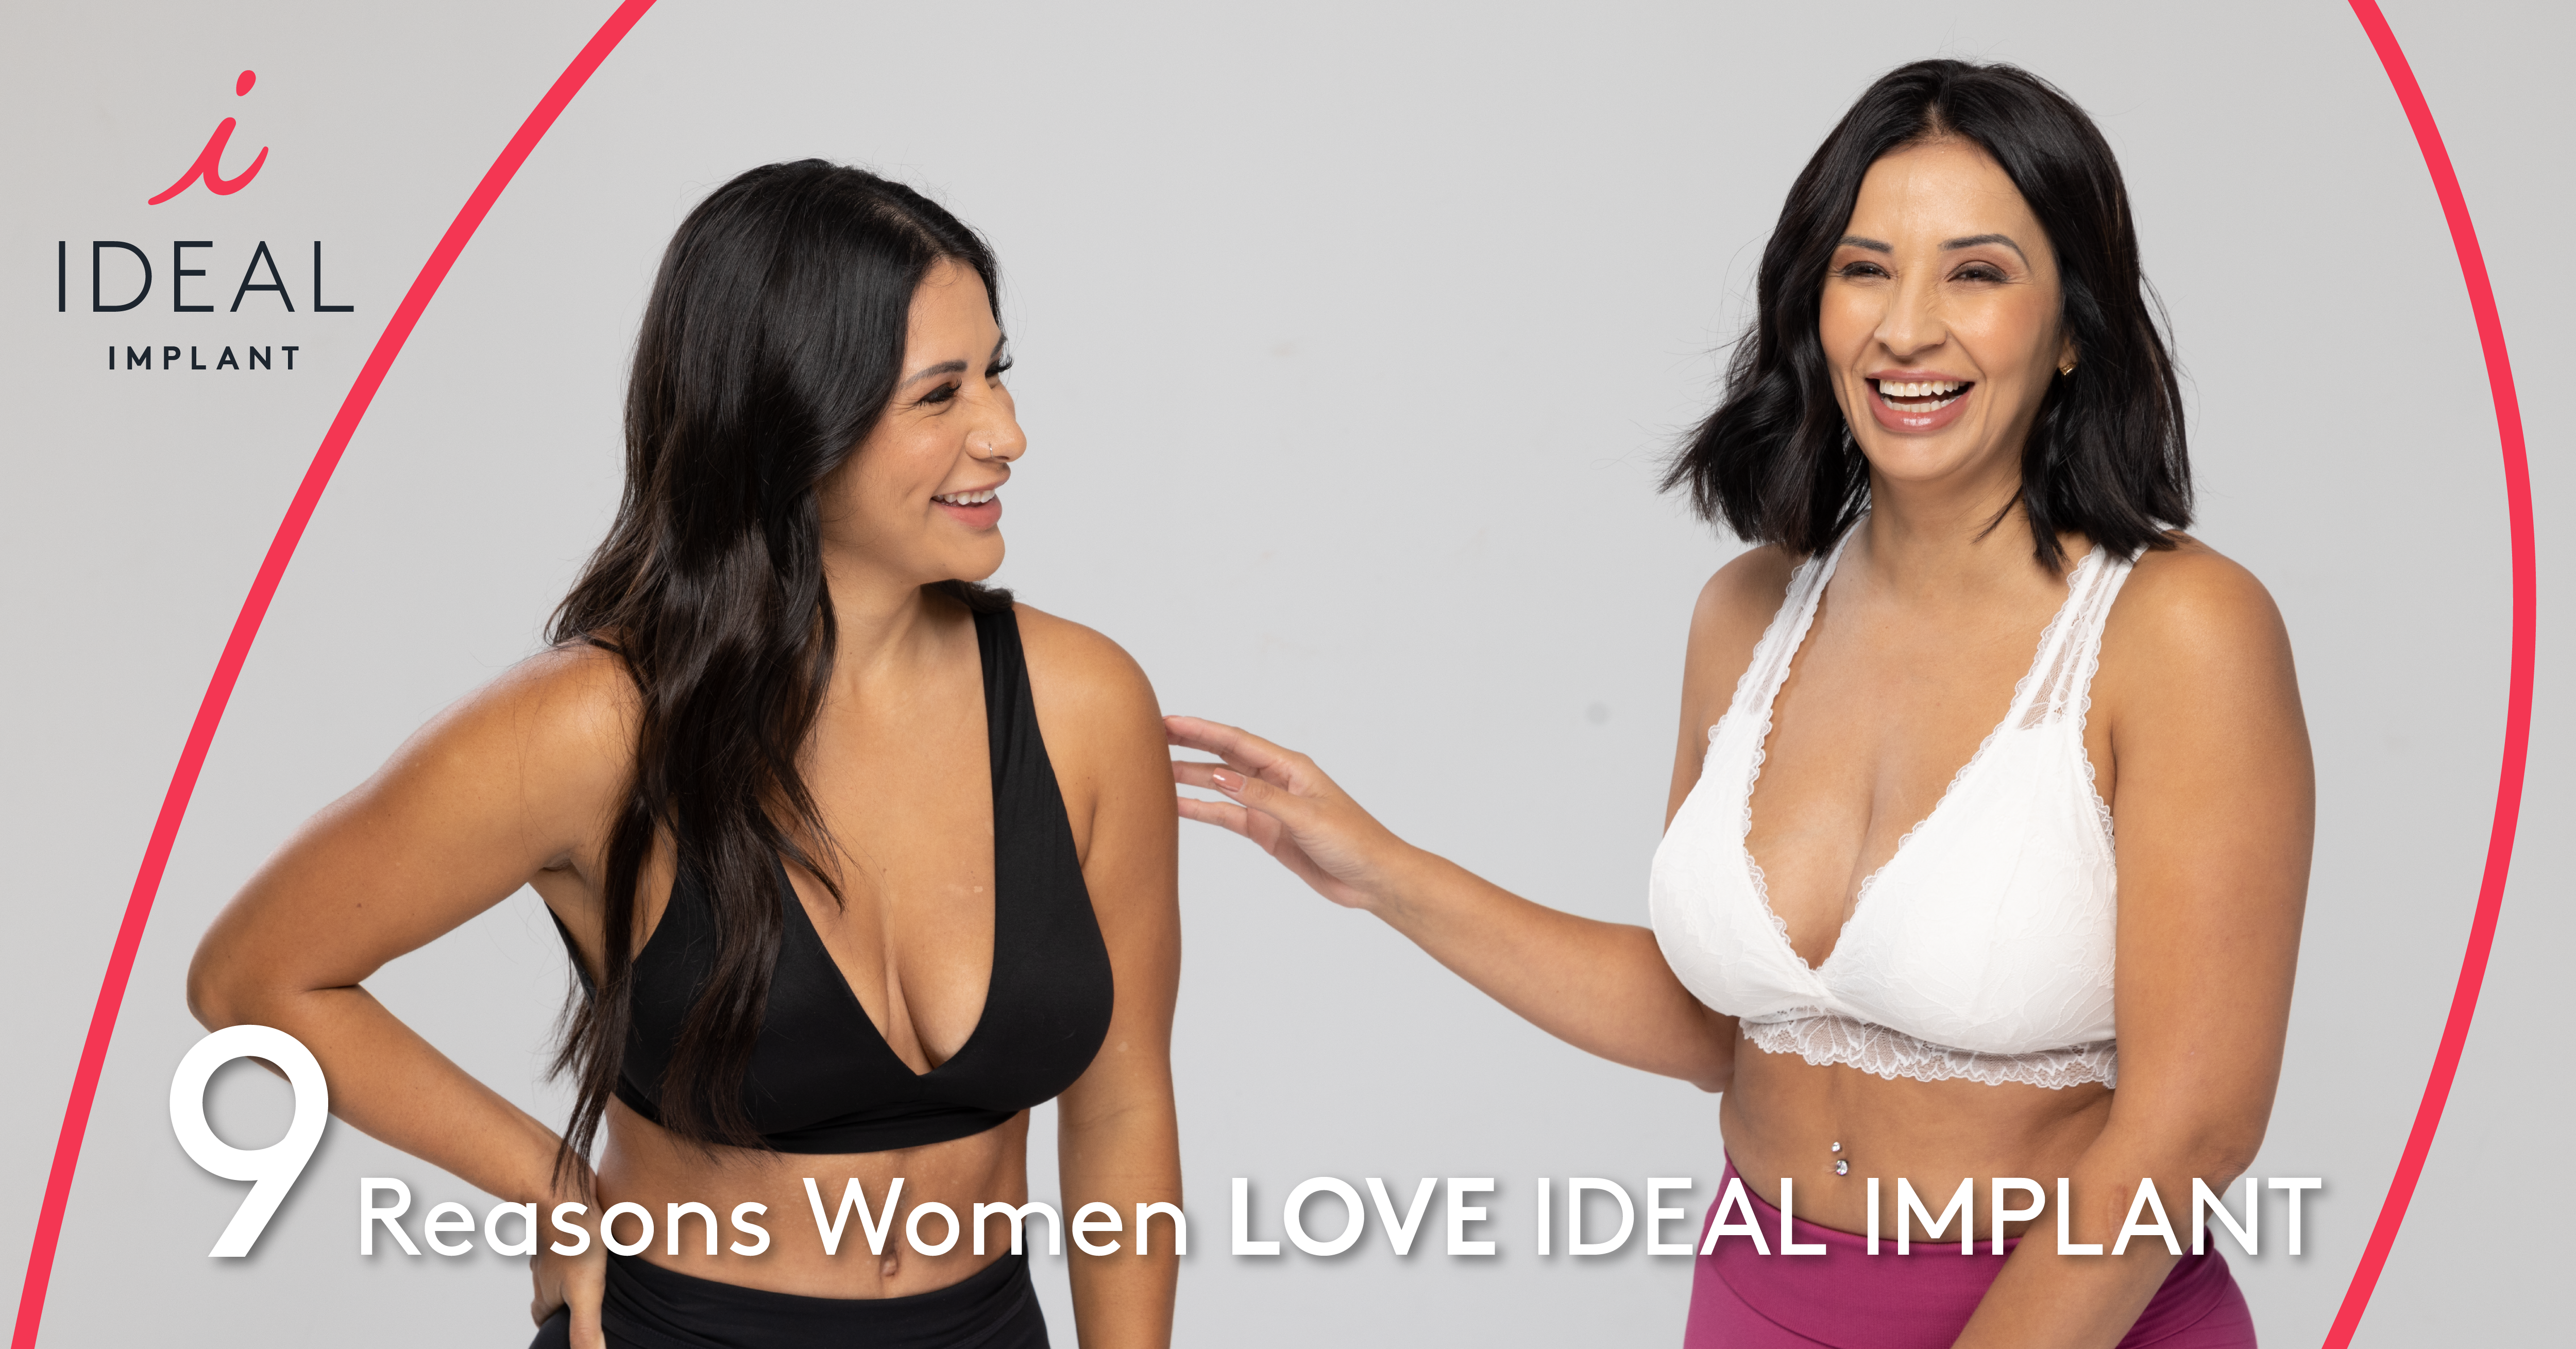 Two women, who are actual IDEAL IMPLANT patients, laughing and smiling together while wearing athleticwear.